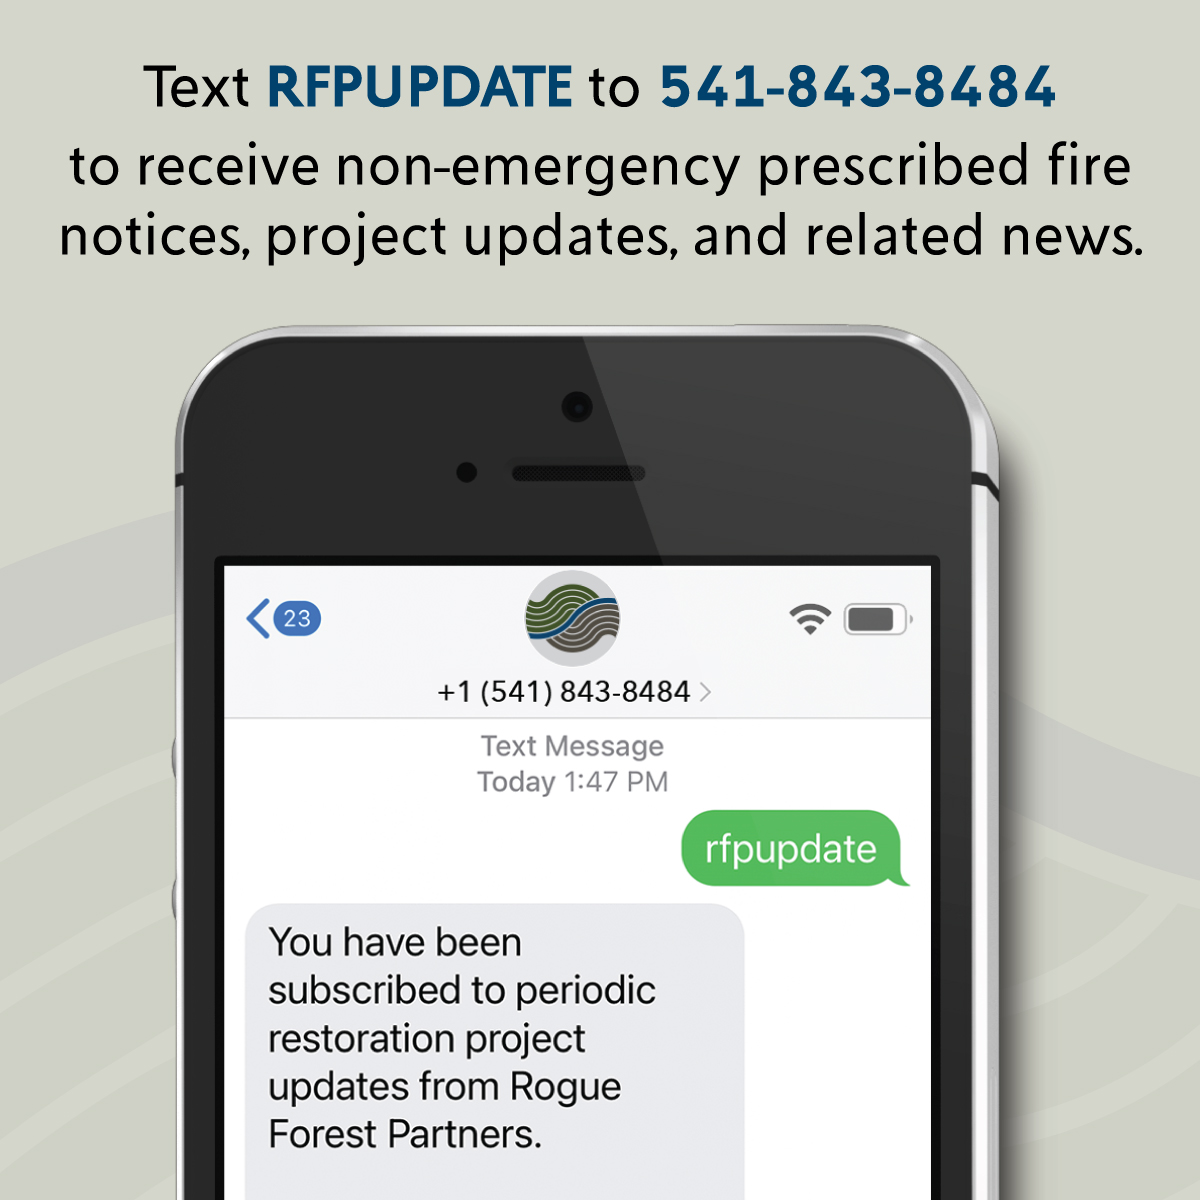 Rogue Basin forest restoration non emergency text updates from the Rogue Forest Partners.